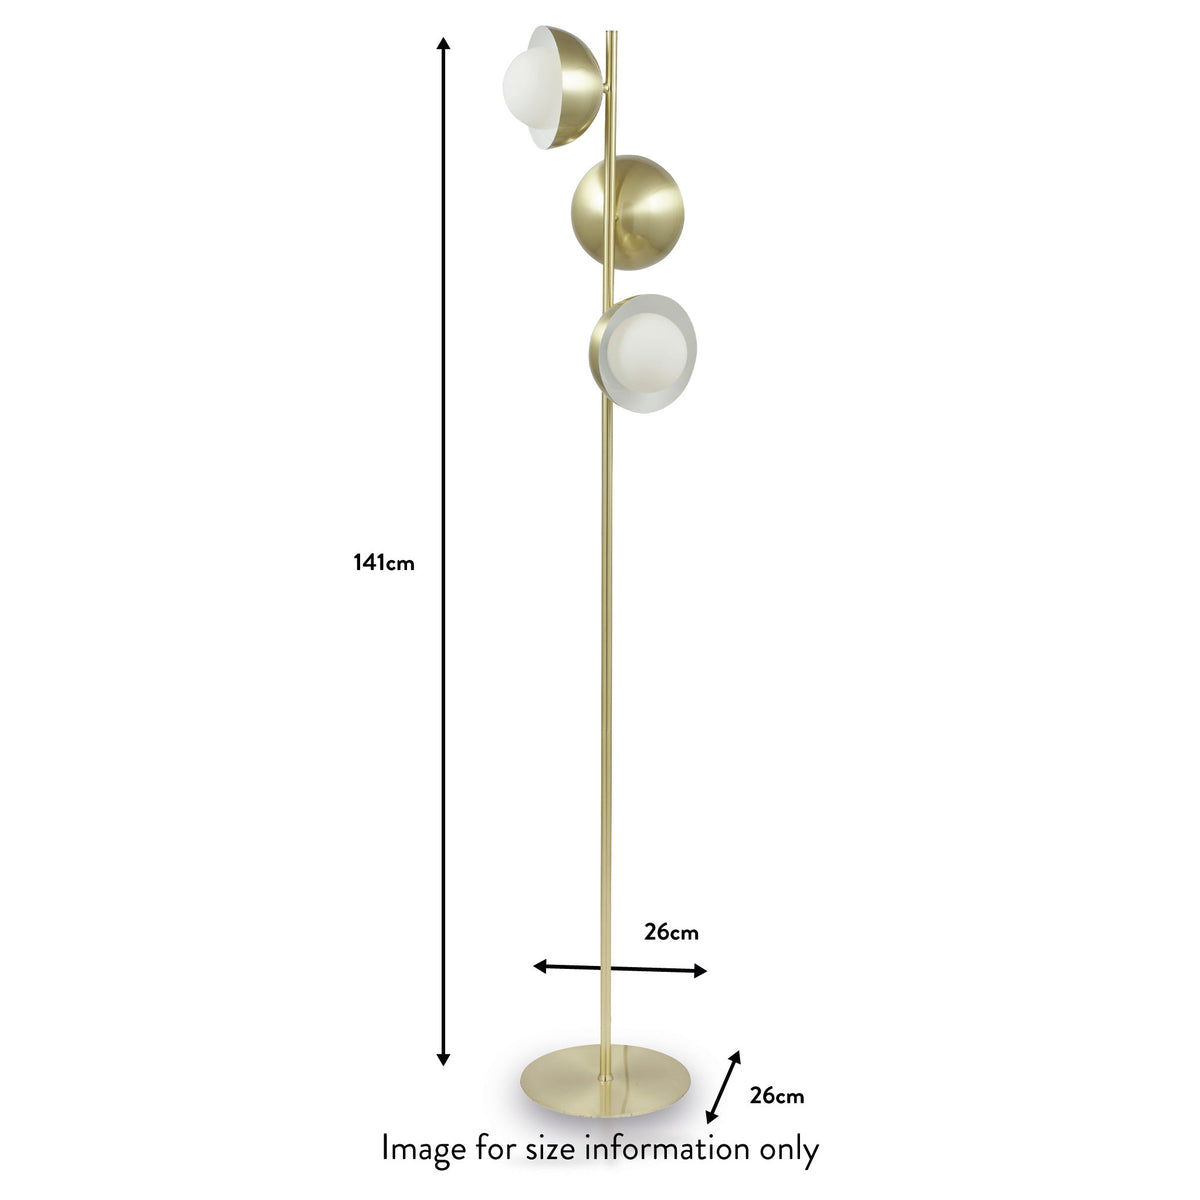 Estelle Brushed Brass Metal and White Orb Dome Floor Lamp dimensions